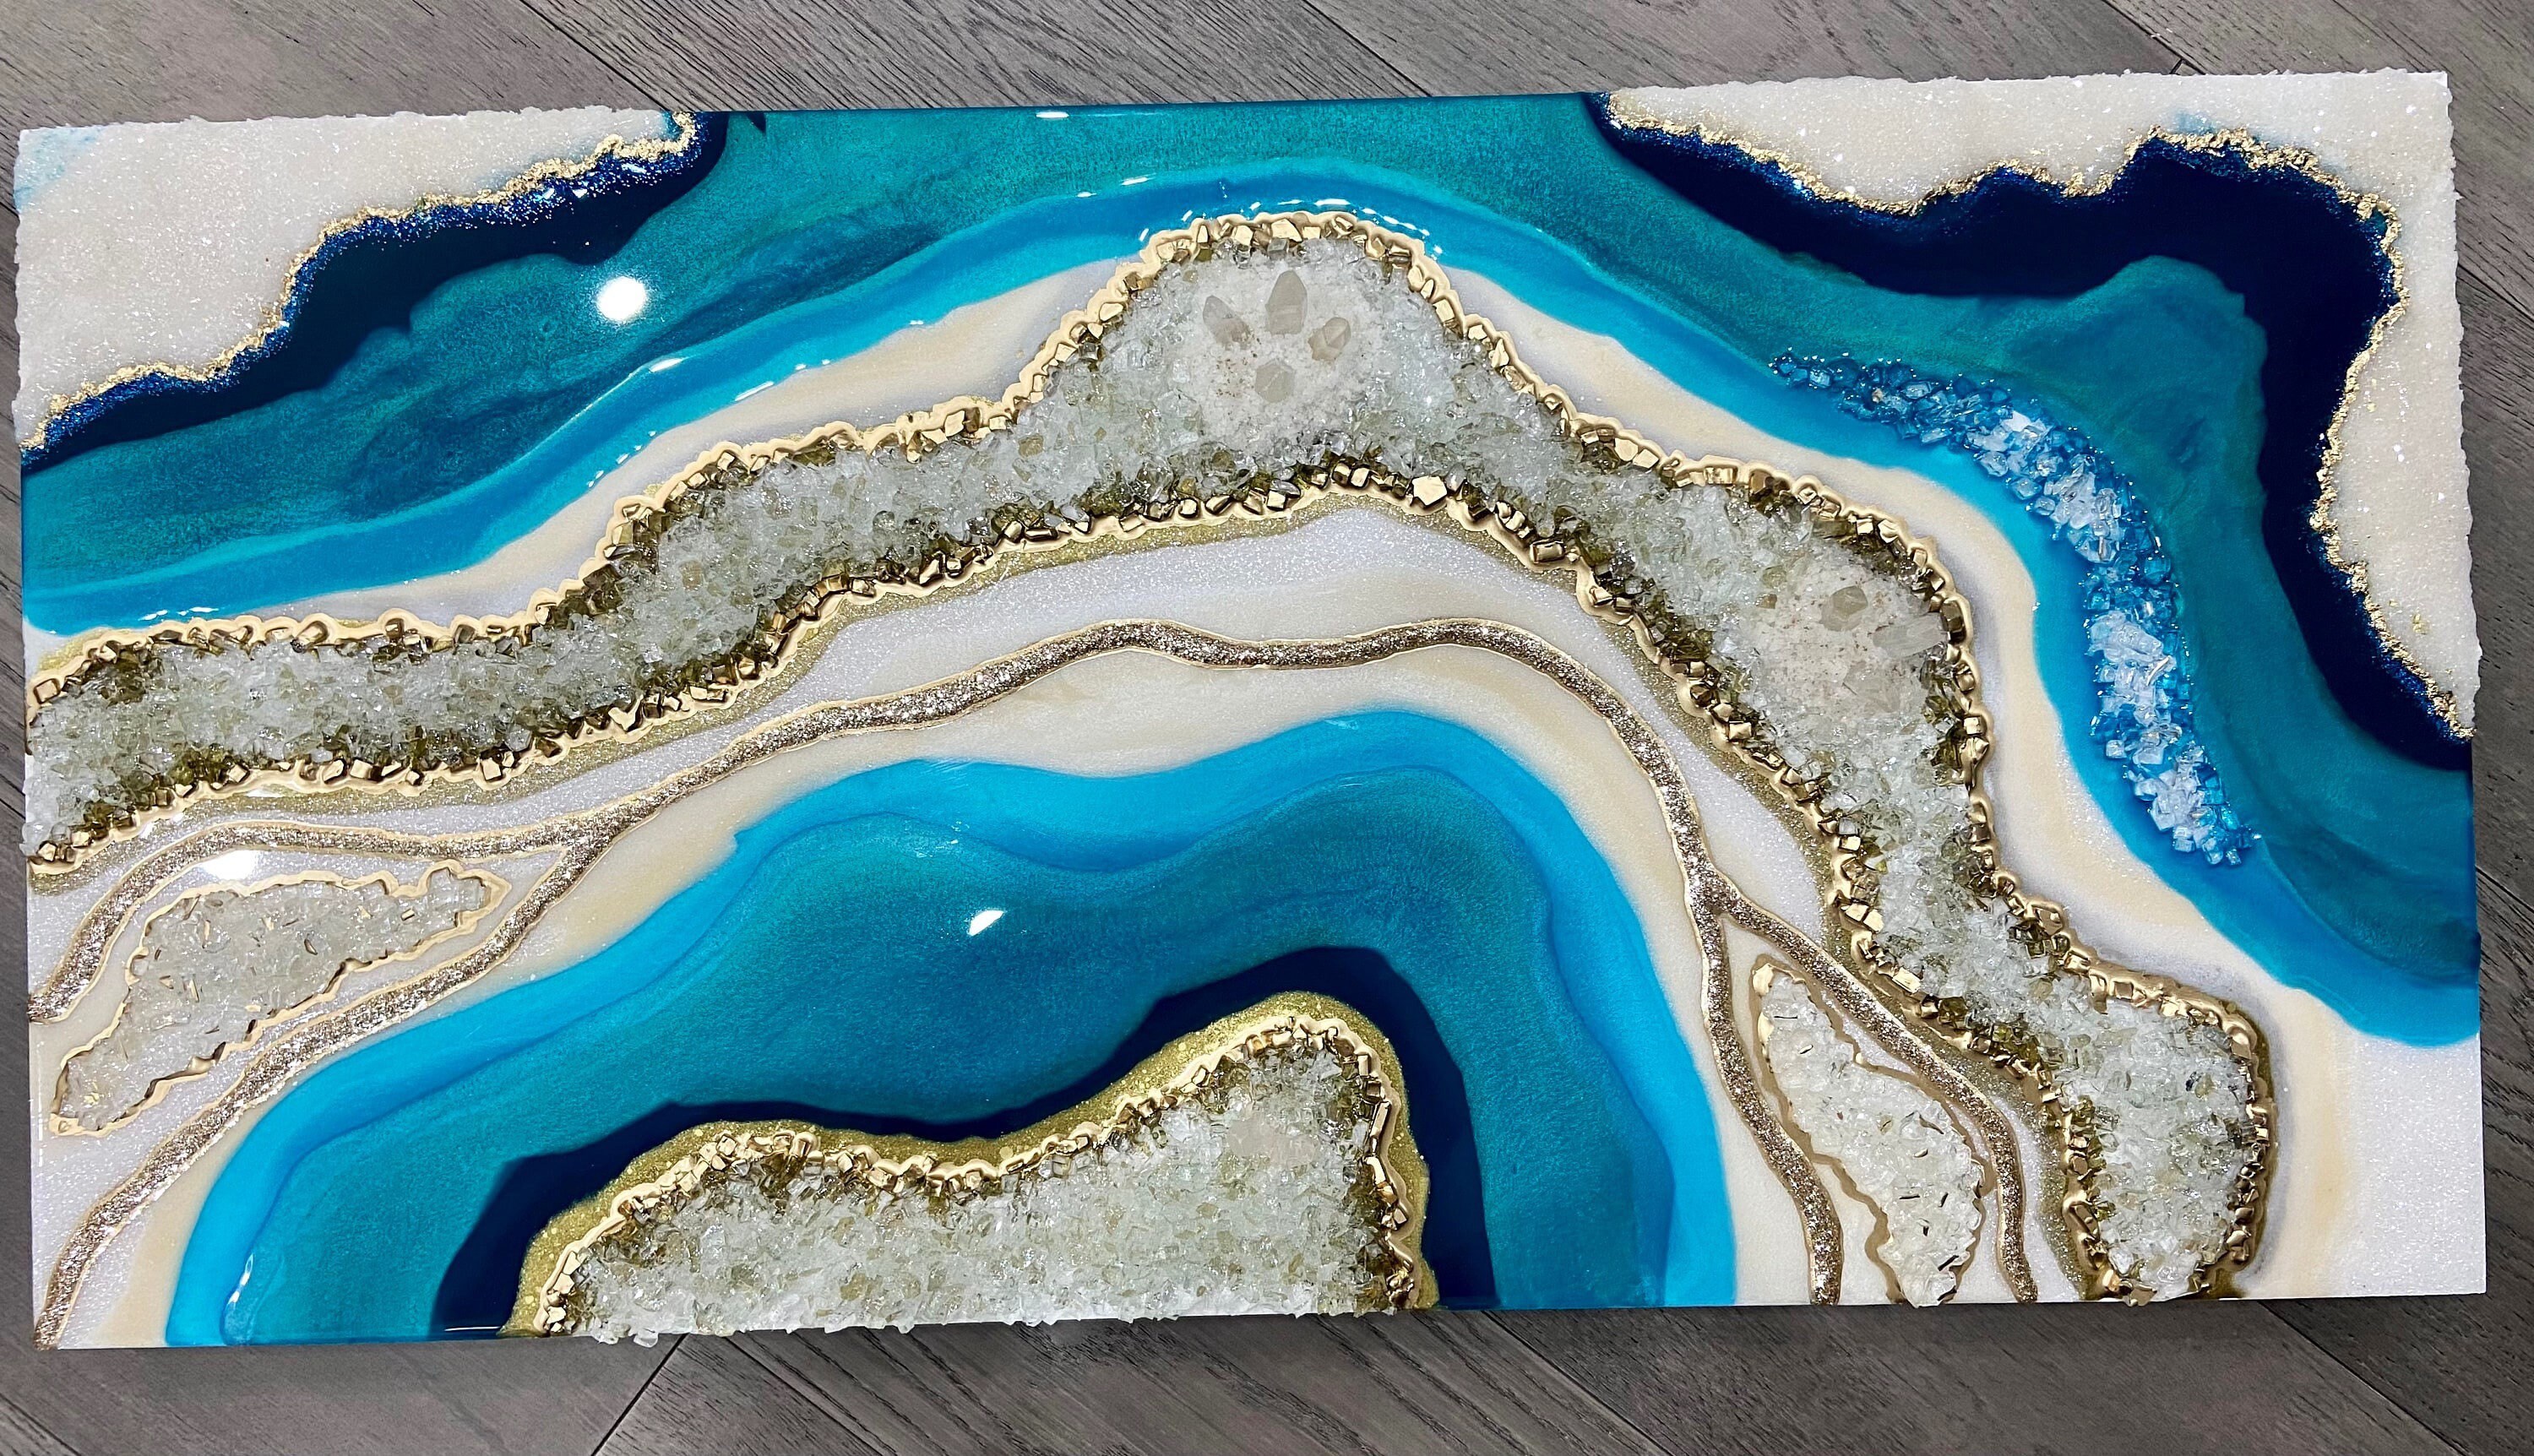 Swirling Resin Art Uses Real Objects to Mimic the Untouched Beauty